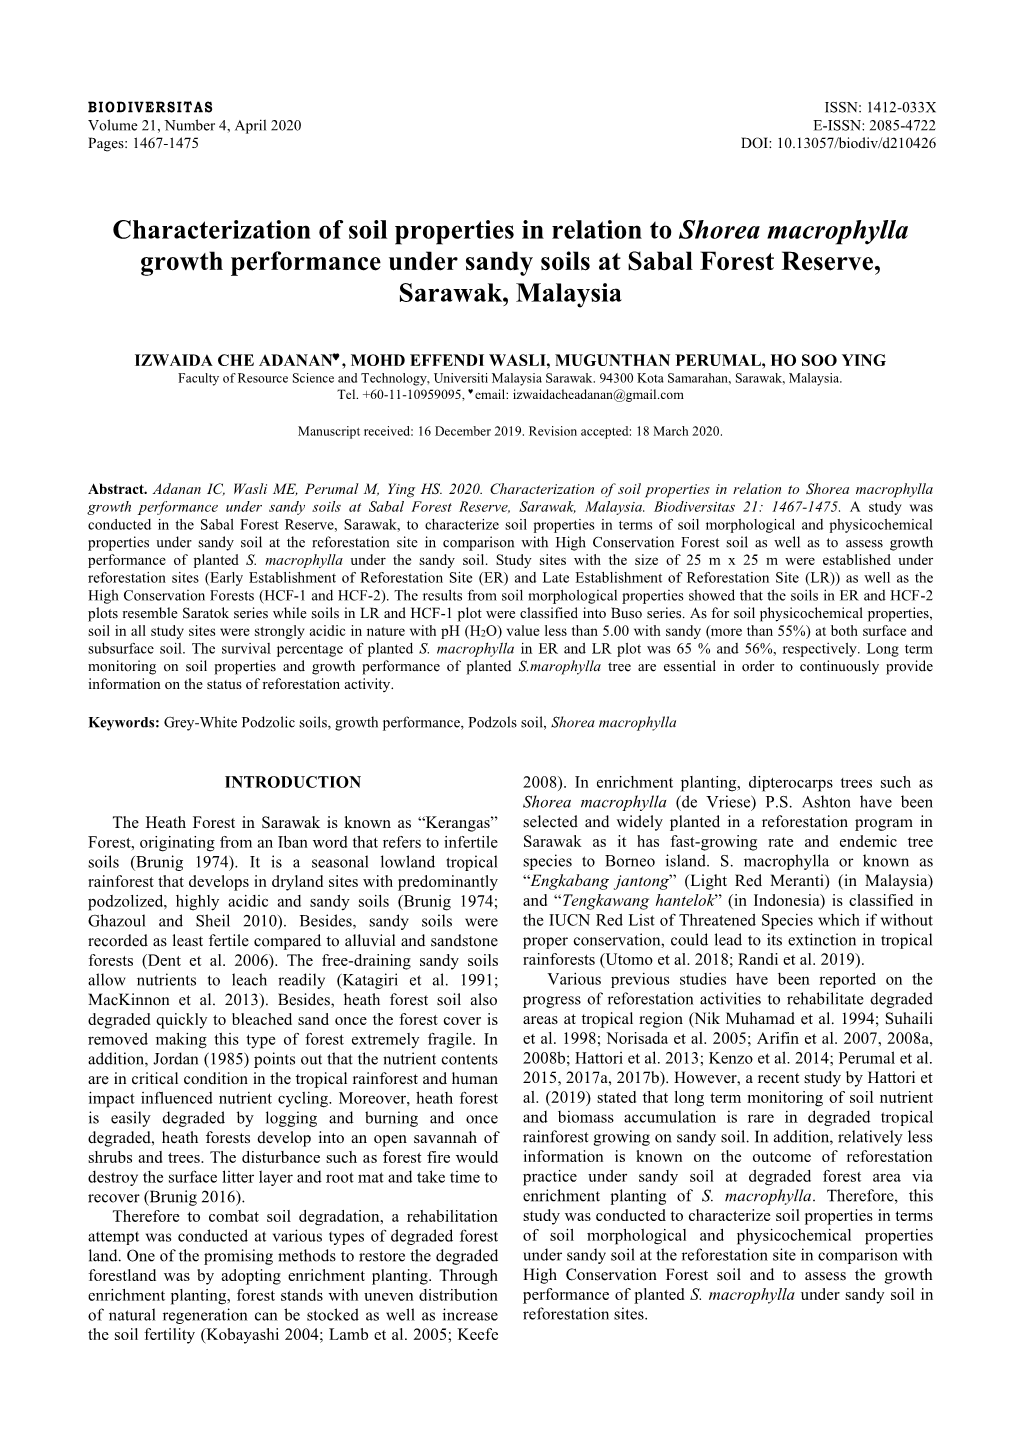 Characterization of Soil Properties in Relation to Shorea Macrophylla Growth Performance Under Sandy Soils at Sabal Forest Reserve, Sarawak, Malaysia